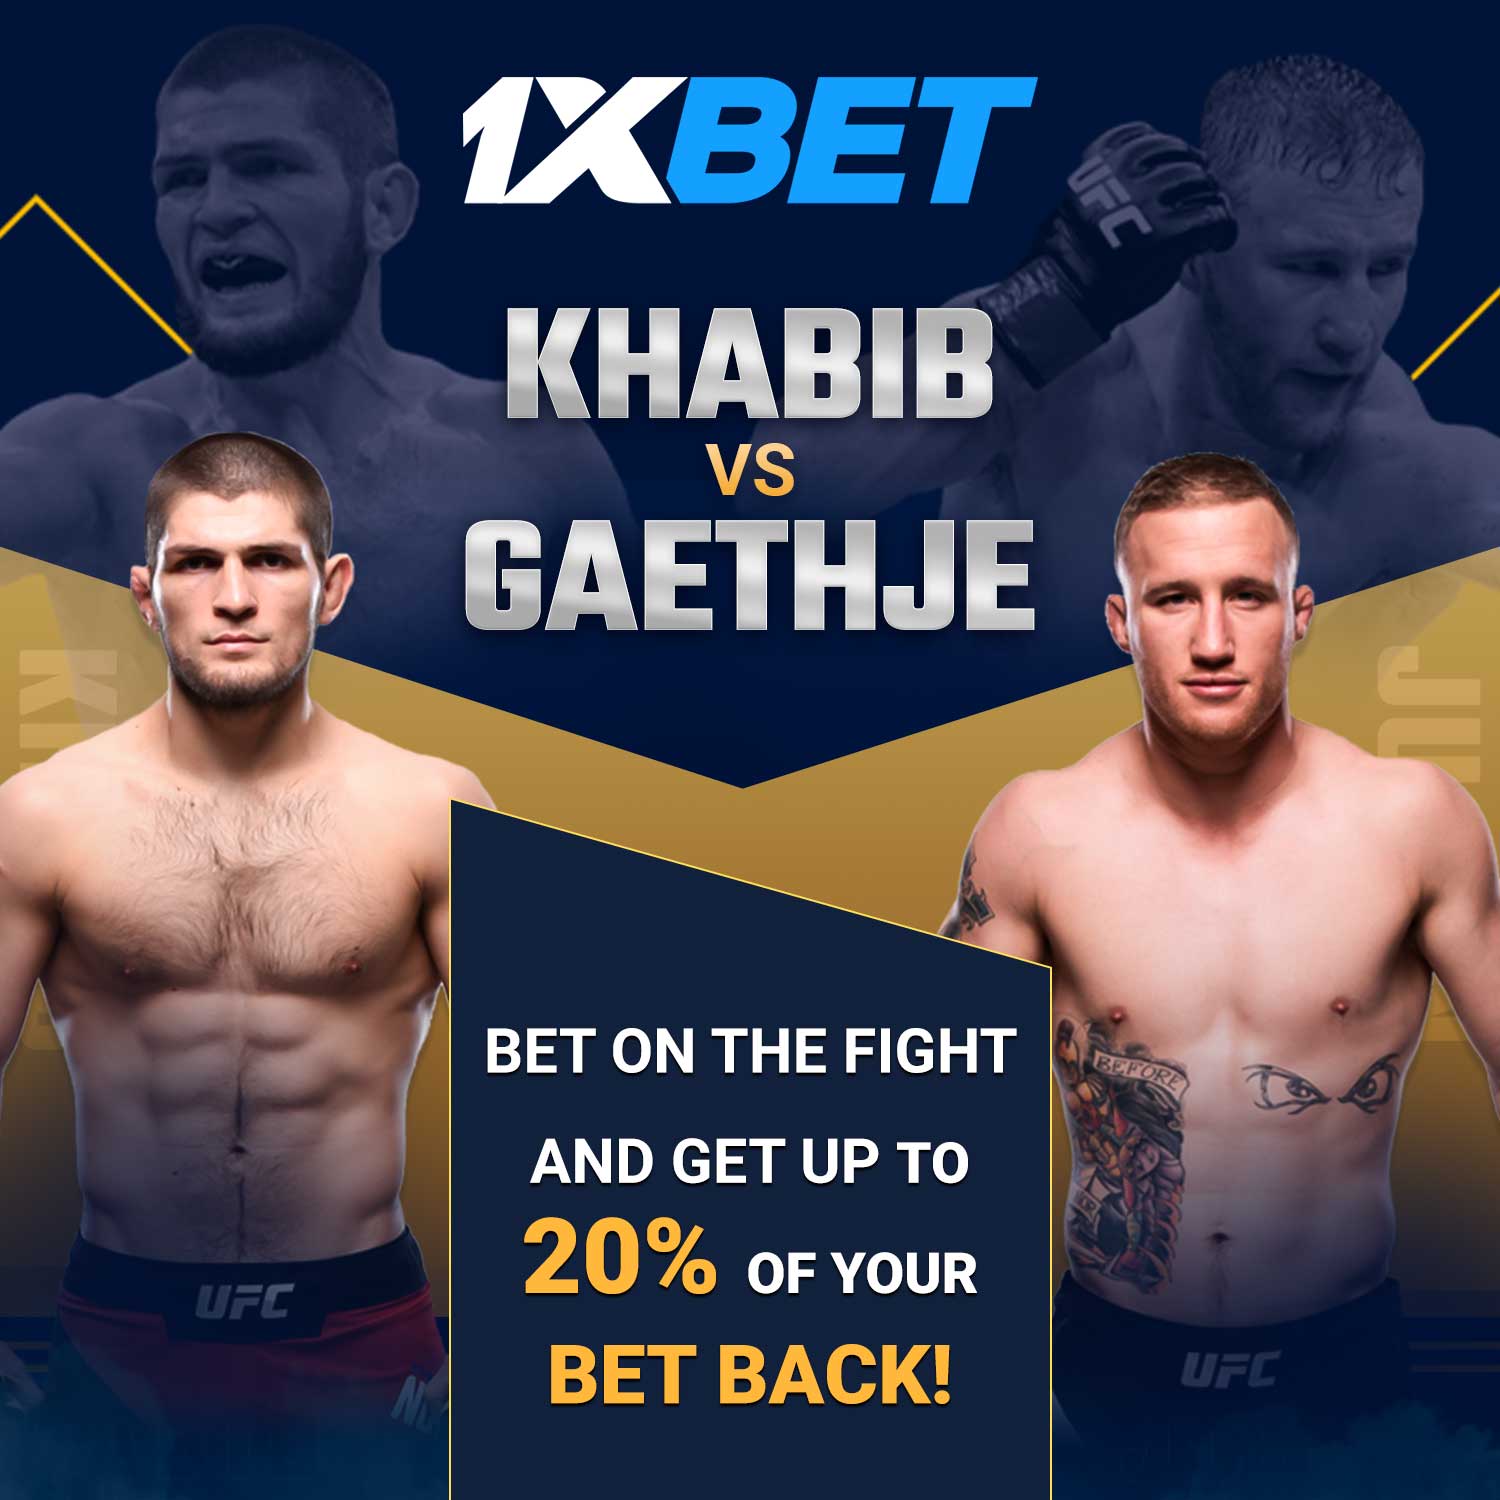 Win with a “Risk-Free Bet” on Nurmagomedov - Gaethje fight at 1xBet